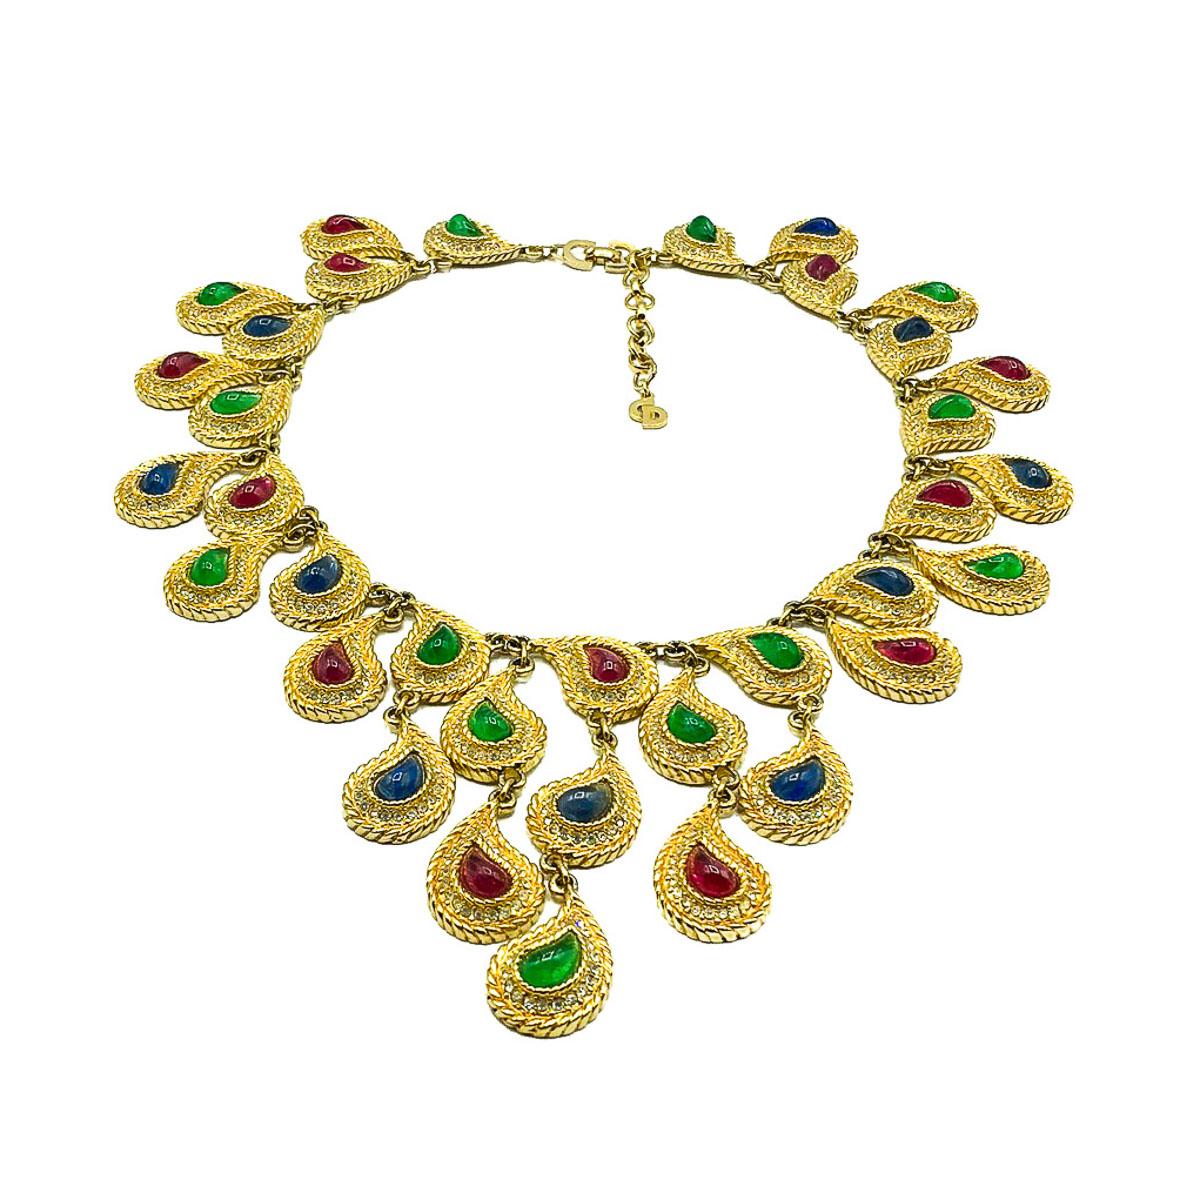 What a find. The most sublime and richly jewelled Vintage Christian Dior Mughal Bib Necklace. Crafted in high quality gold plated metal and set with exquisite glass paisley stones, depicting flawed rubies, sapphires and emeralds and surrounded by